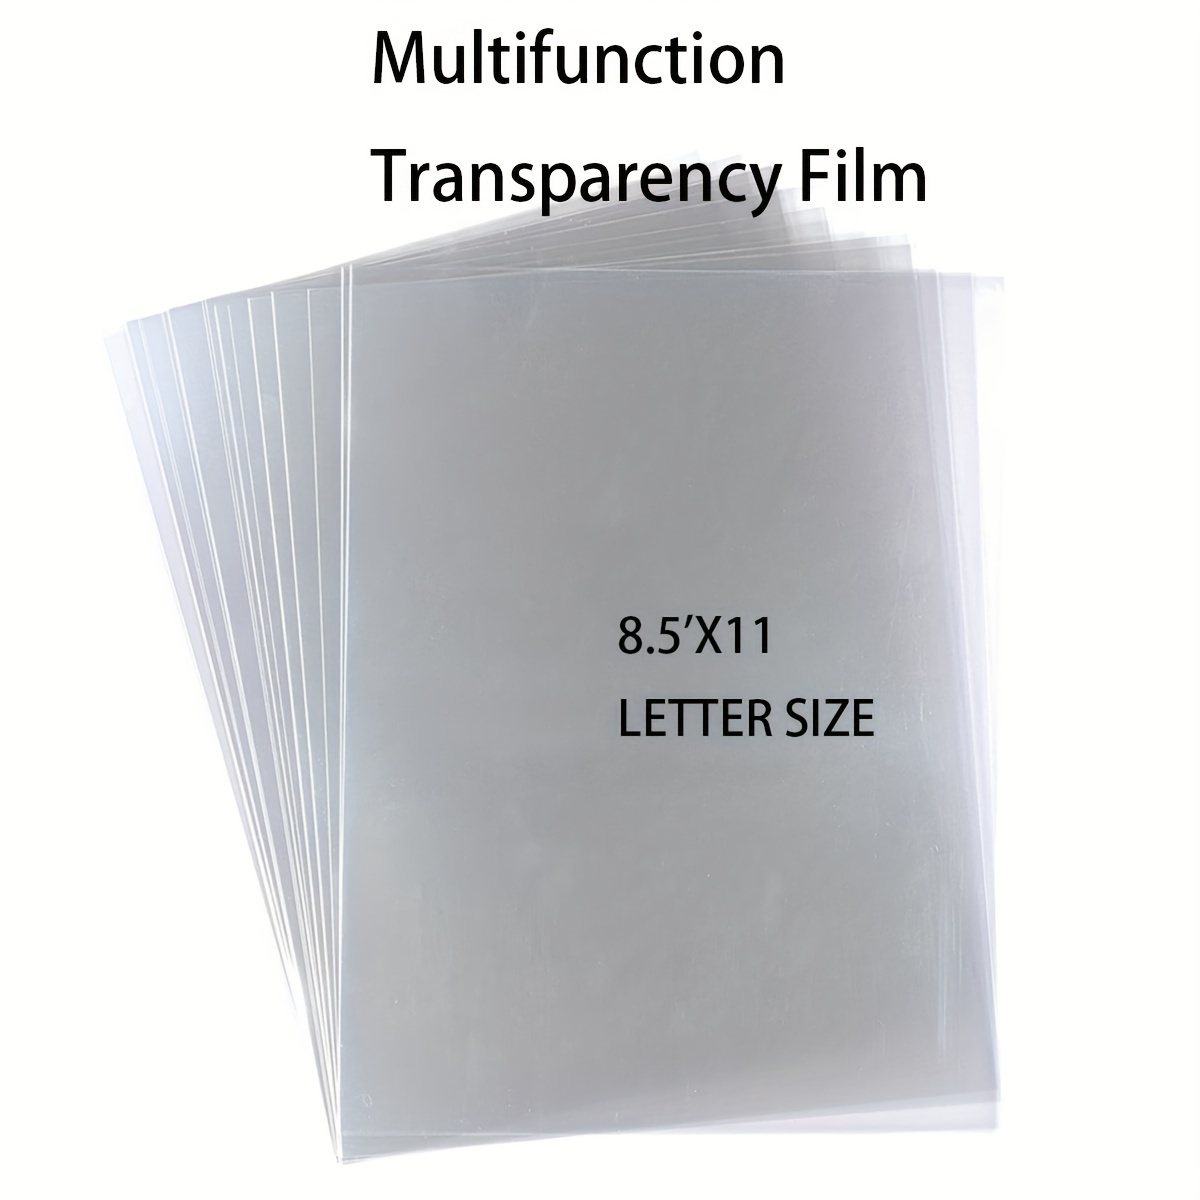 What kind of Plastic is Transparency Film?